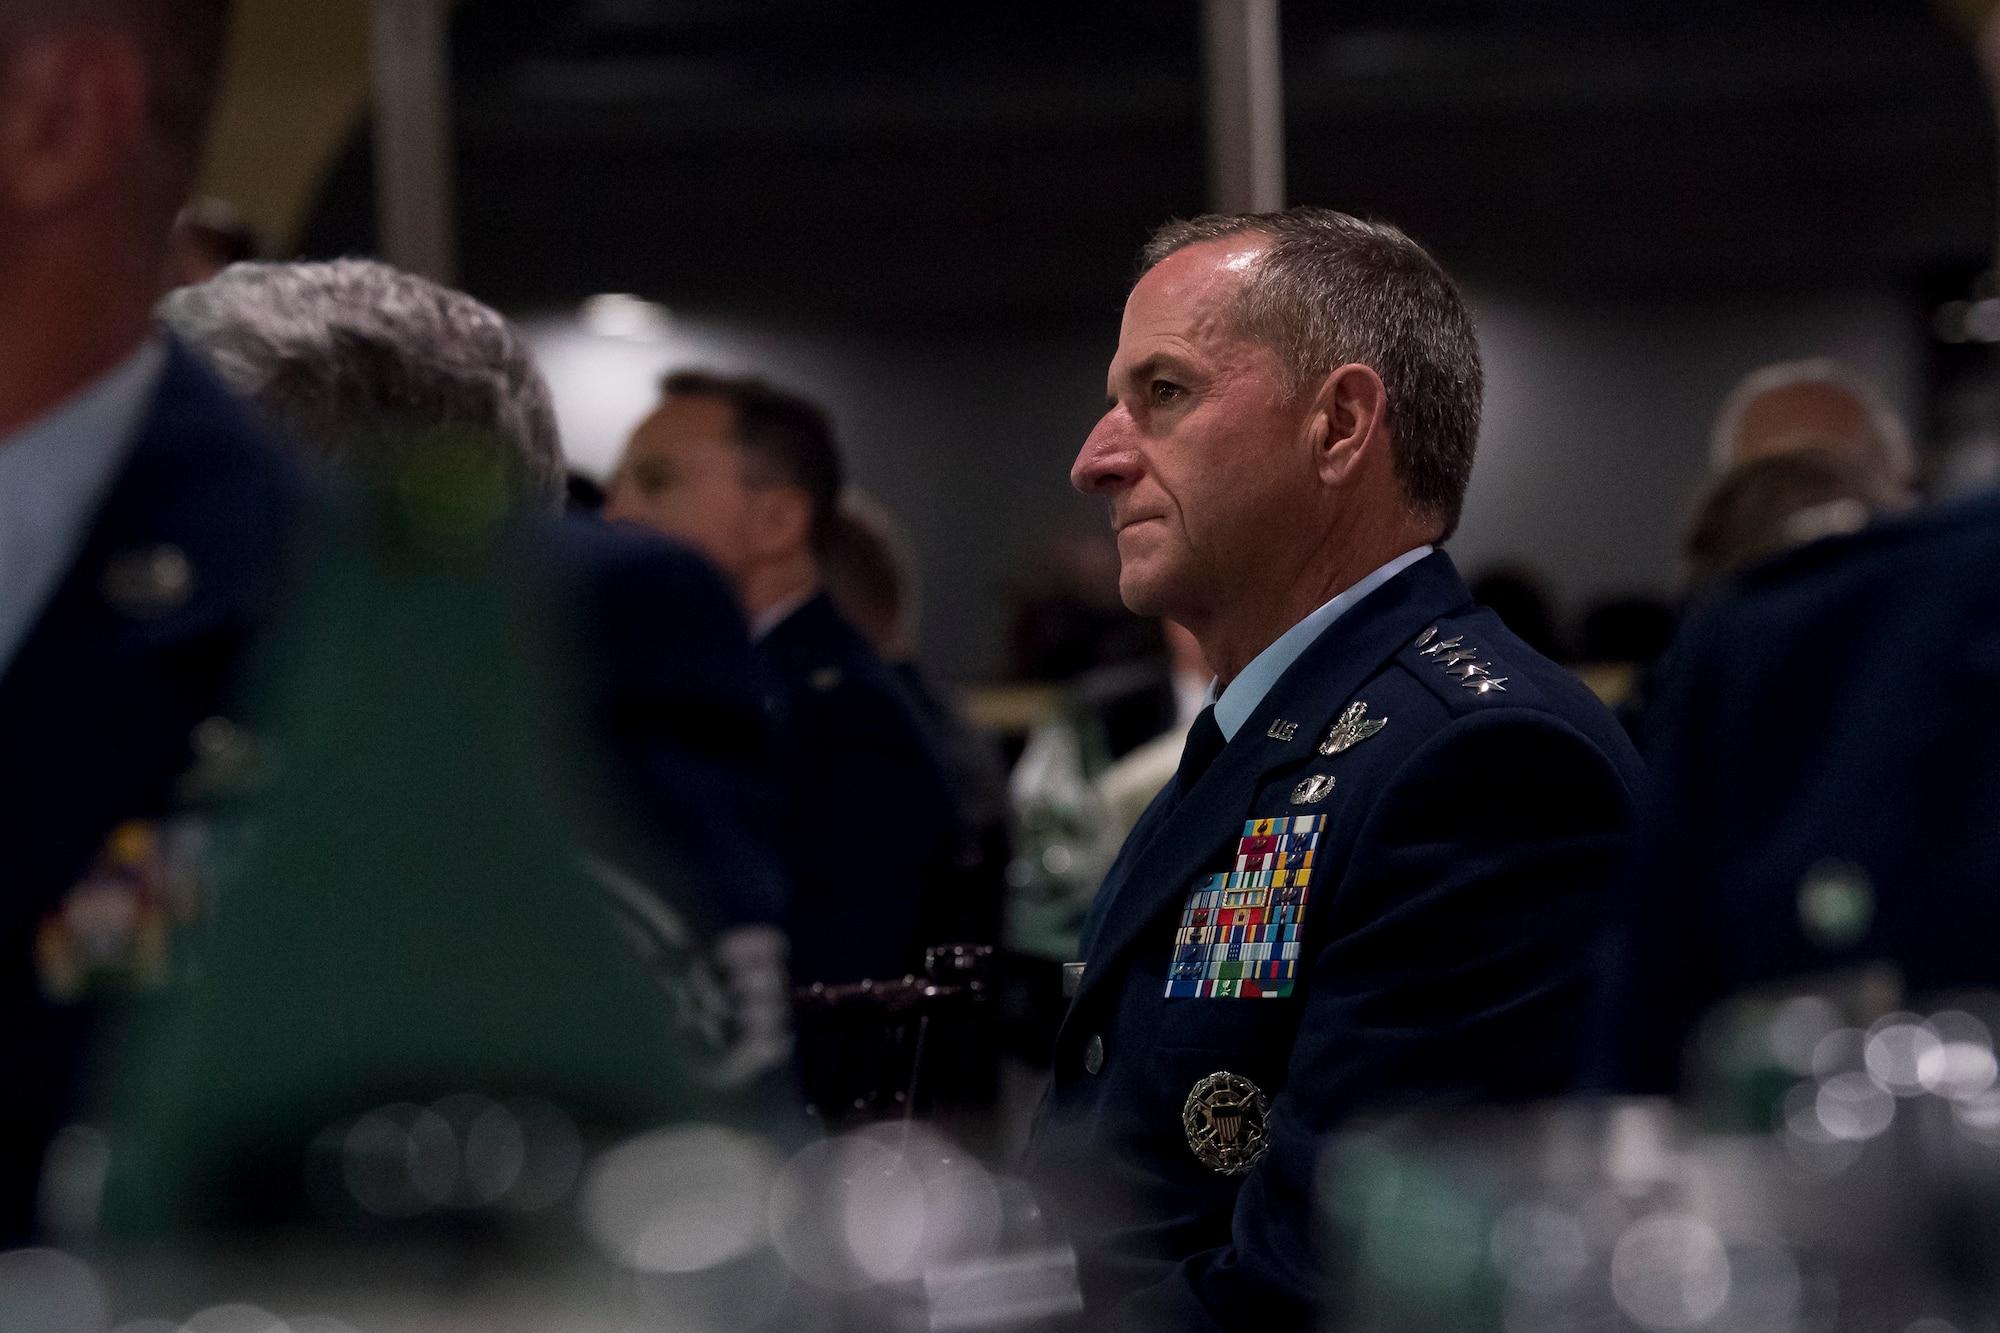 Air Force Chief of Staff Gen. David L. Goldfein listens to remarks during the banquet celebrating the 50th reunion of the Jolly Green Association (JGA), May 4, 2019, in Fort Walton Beach, Fla. The JGA presented Airmen from the 41st Rescue Squadron (RQS) and the 48th RQS with the Rescue Mission of the Year award; the only non Air Force rescue award recognized by the Air Force. (U.S. Air Force Photo by Staff Sgt. Janiqua P. Robinson)